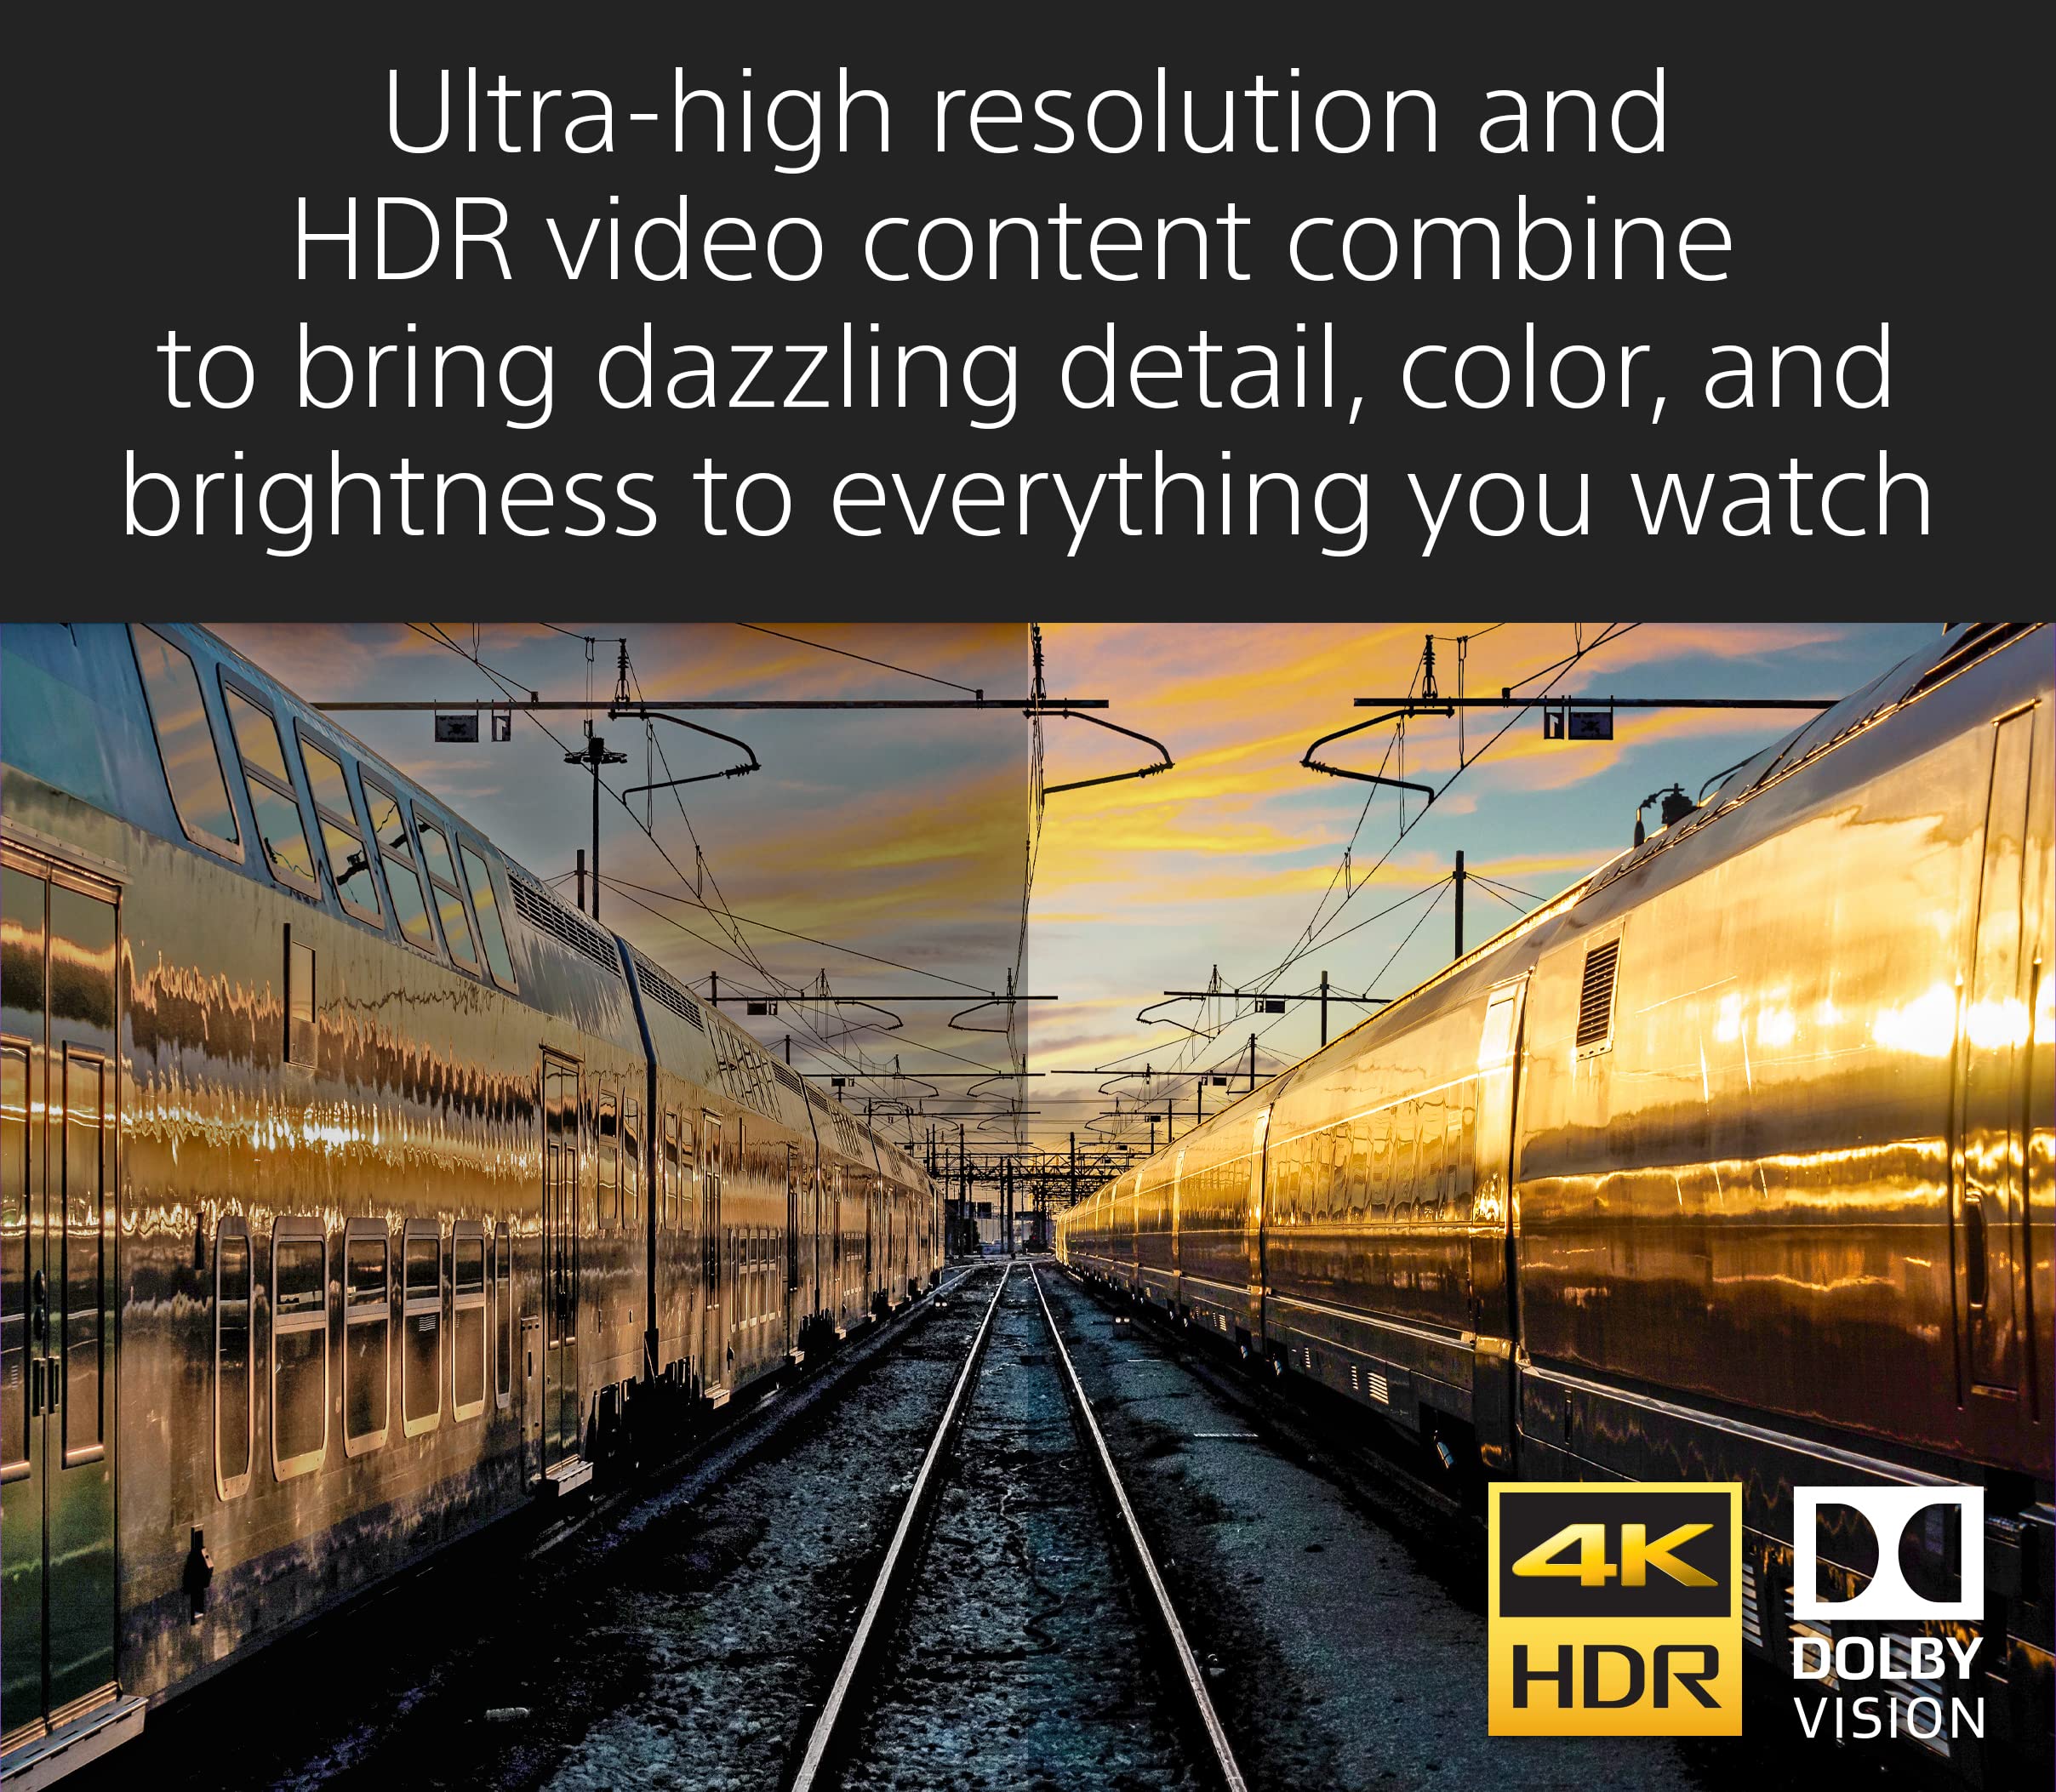 Sony 43 Inch 4K Ultra HD TV X80K Series: LED Smart Google TV with Dolby Vision HDR KD43X80K- Latest Model